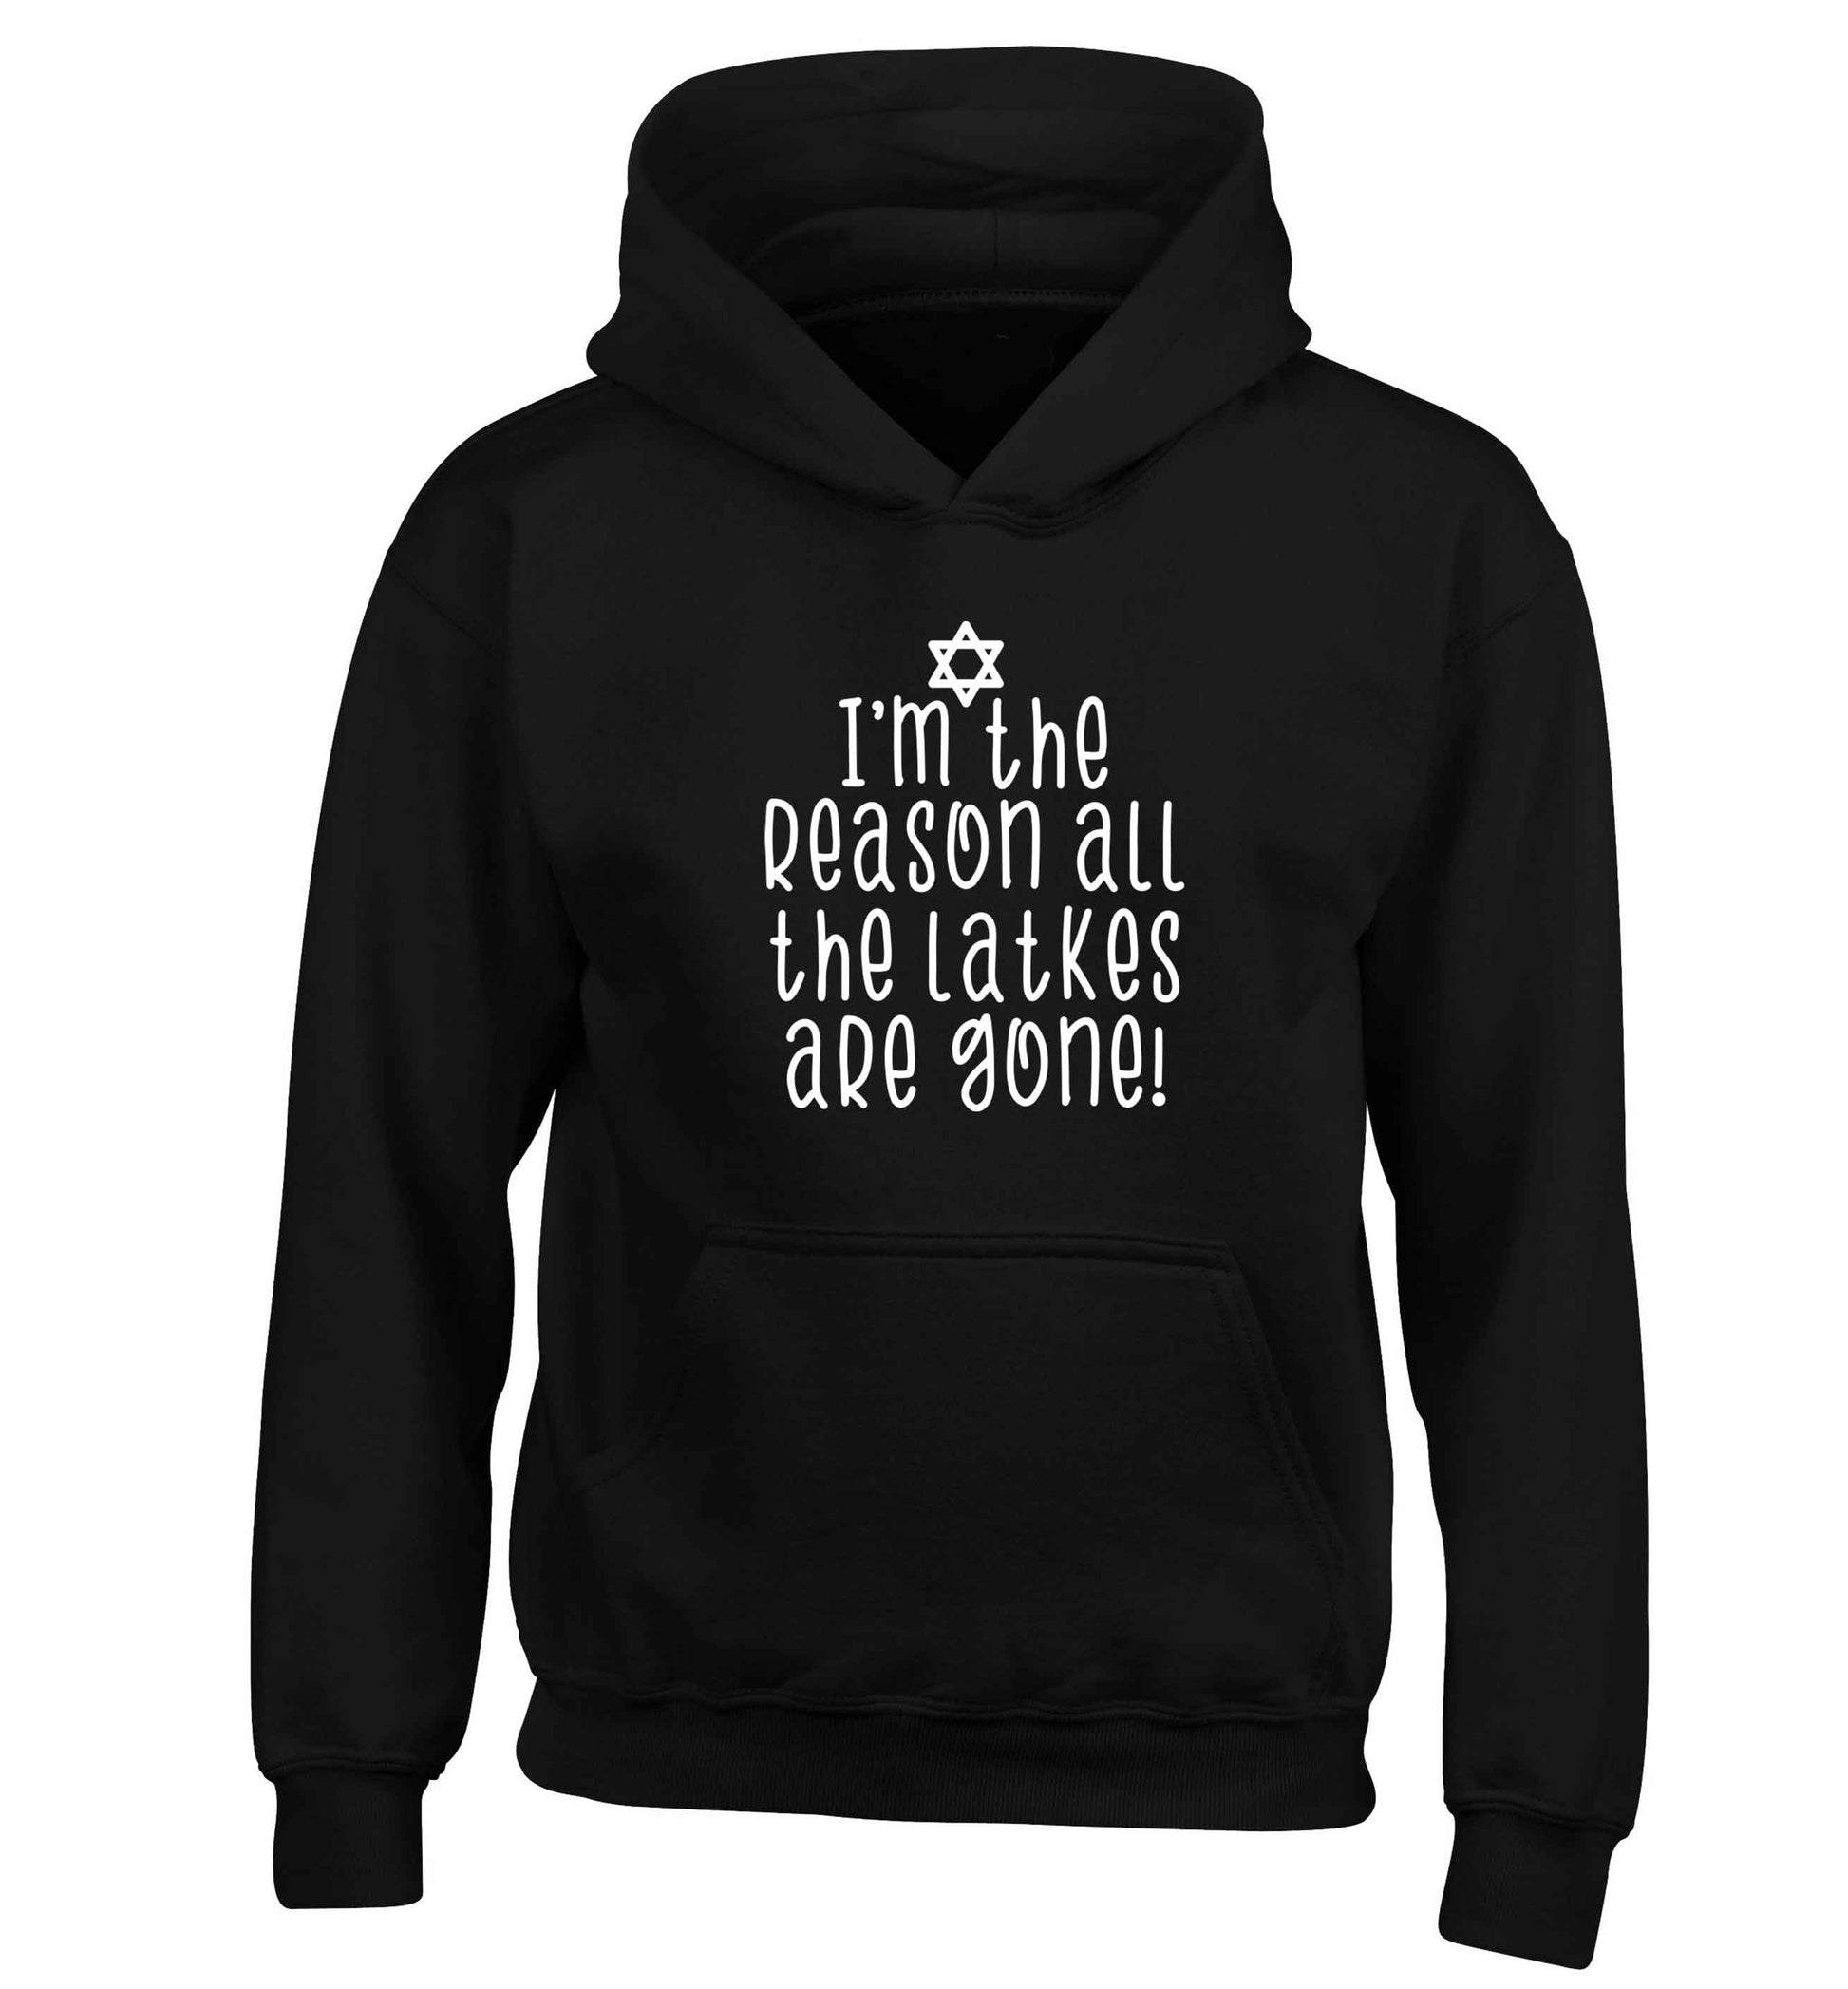 I'm the reason all the latkes are gone children's black hoodie 12-13 Years